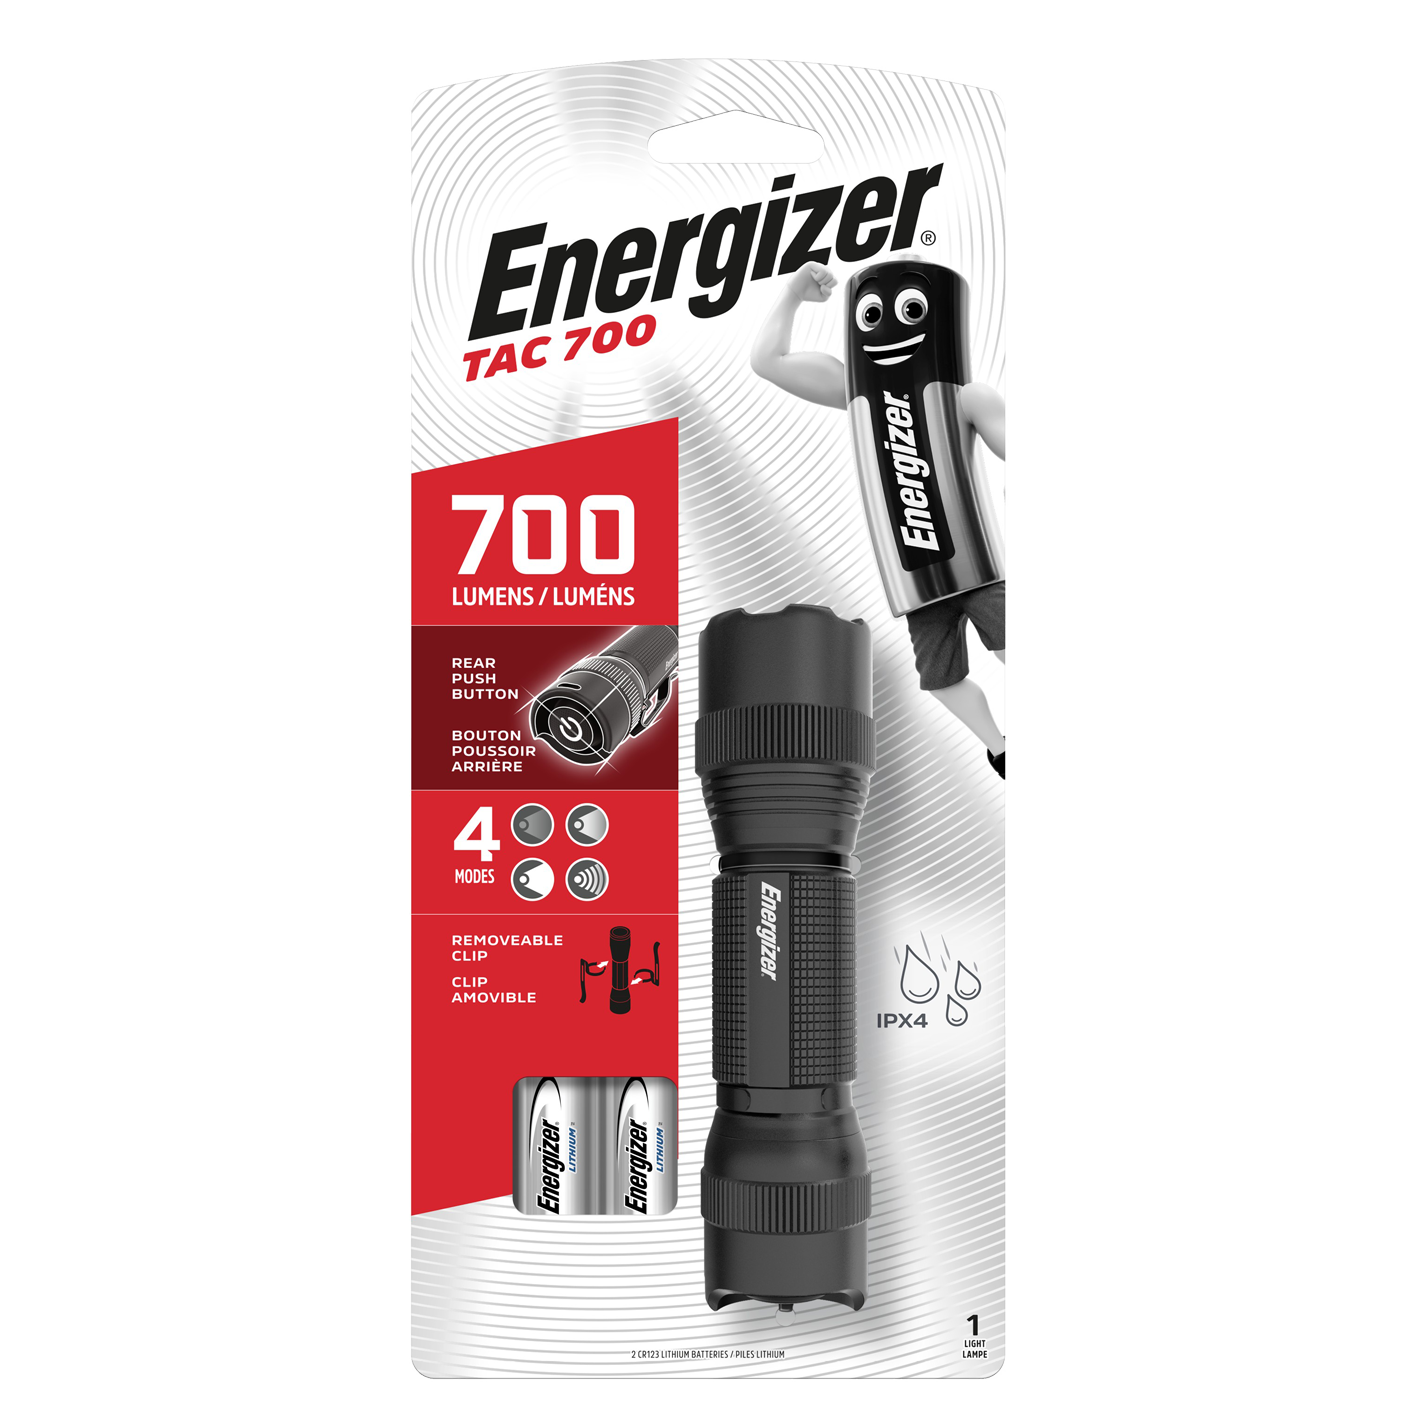 Energizer TAC700 Durable Professional Torch With 2 x CR123 Batteries